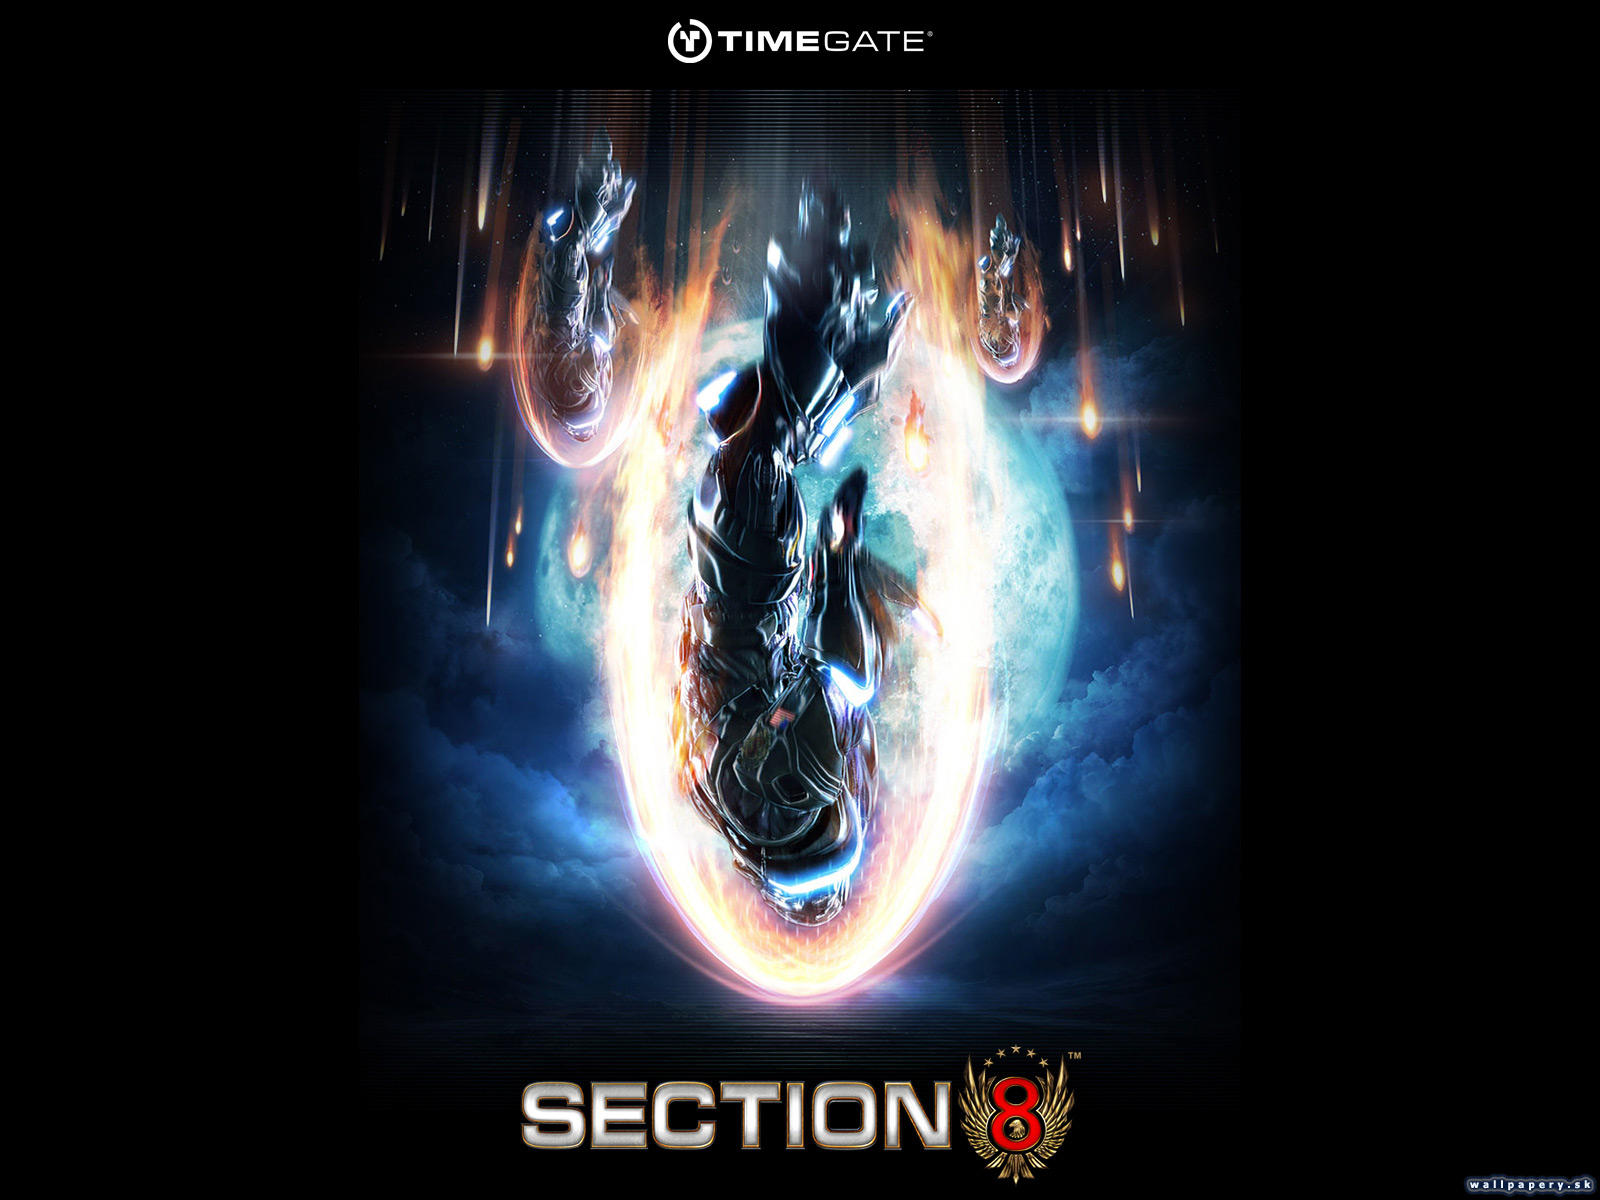 Section 8 - wallpaper 13